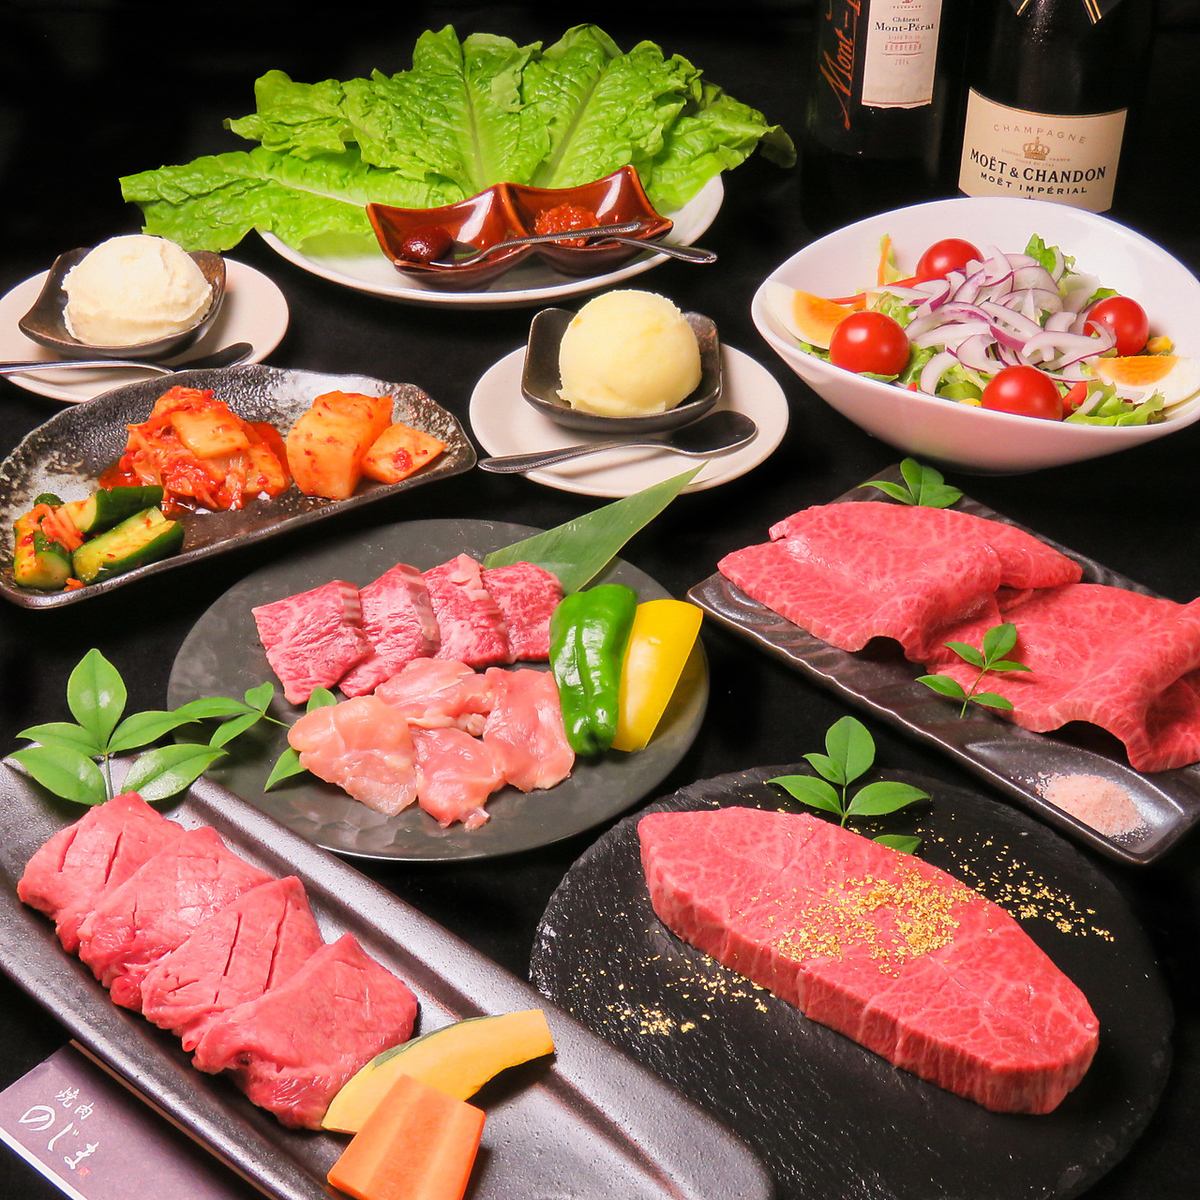 Feel free to eat good meat.Awa beef specialty store from Tokushima Prefecture! A hideaway yakiniku restaurant "Nojima" where meat lovers often go